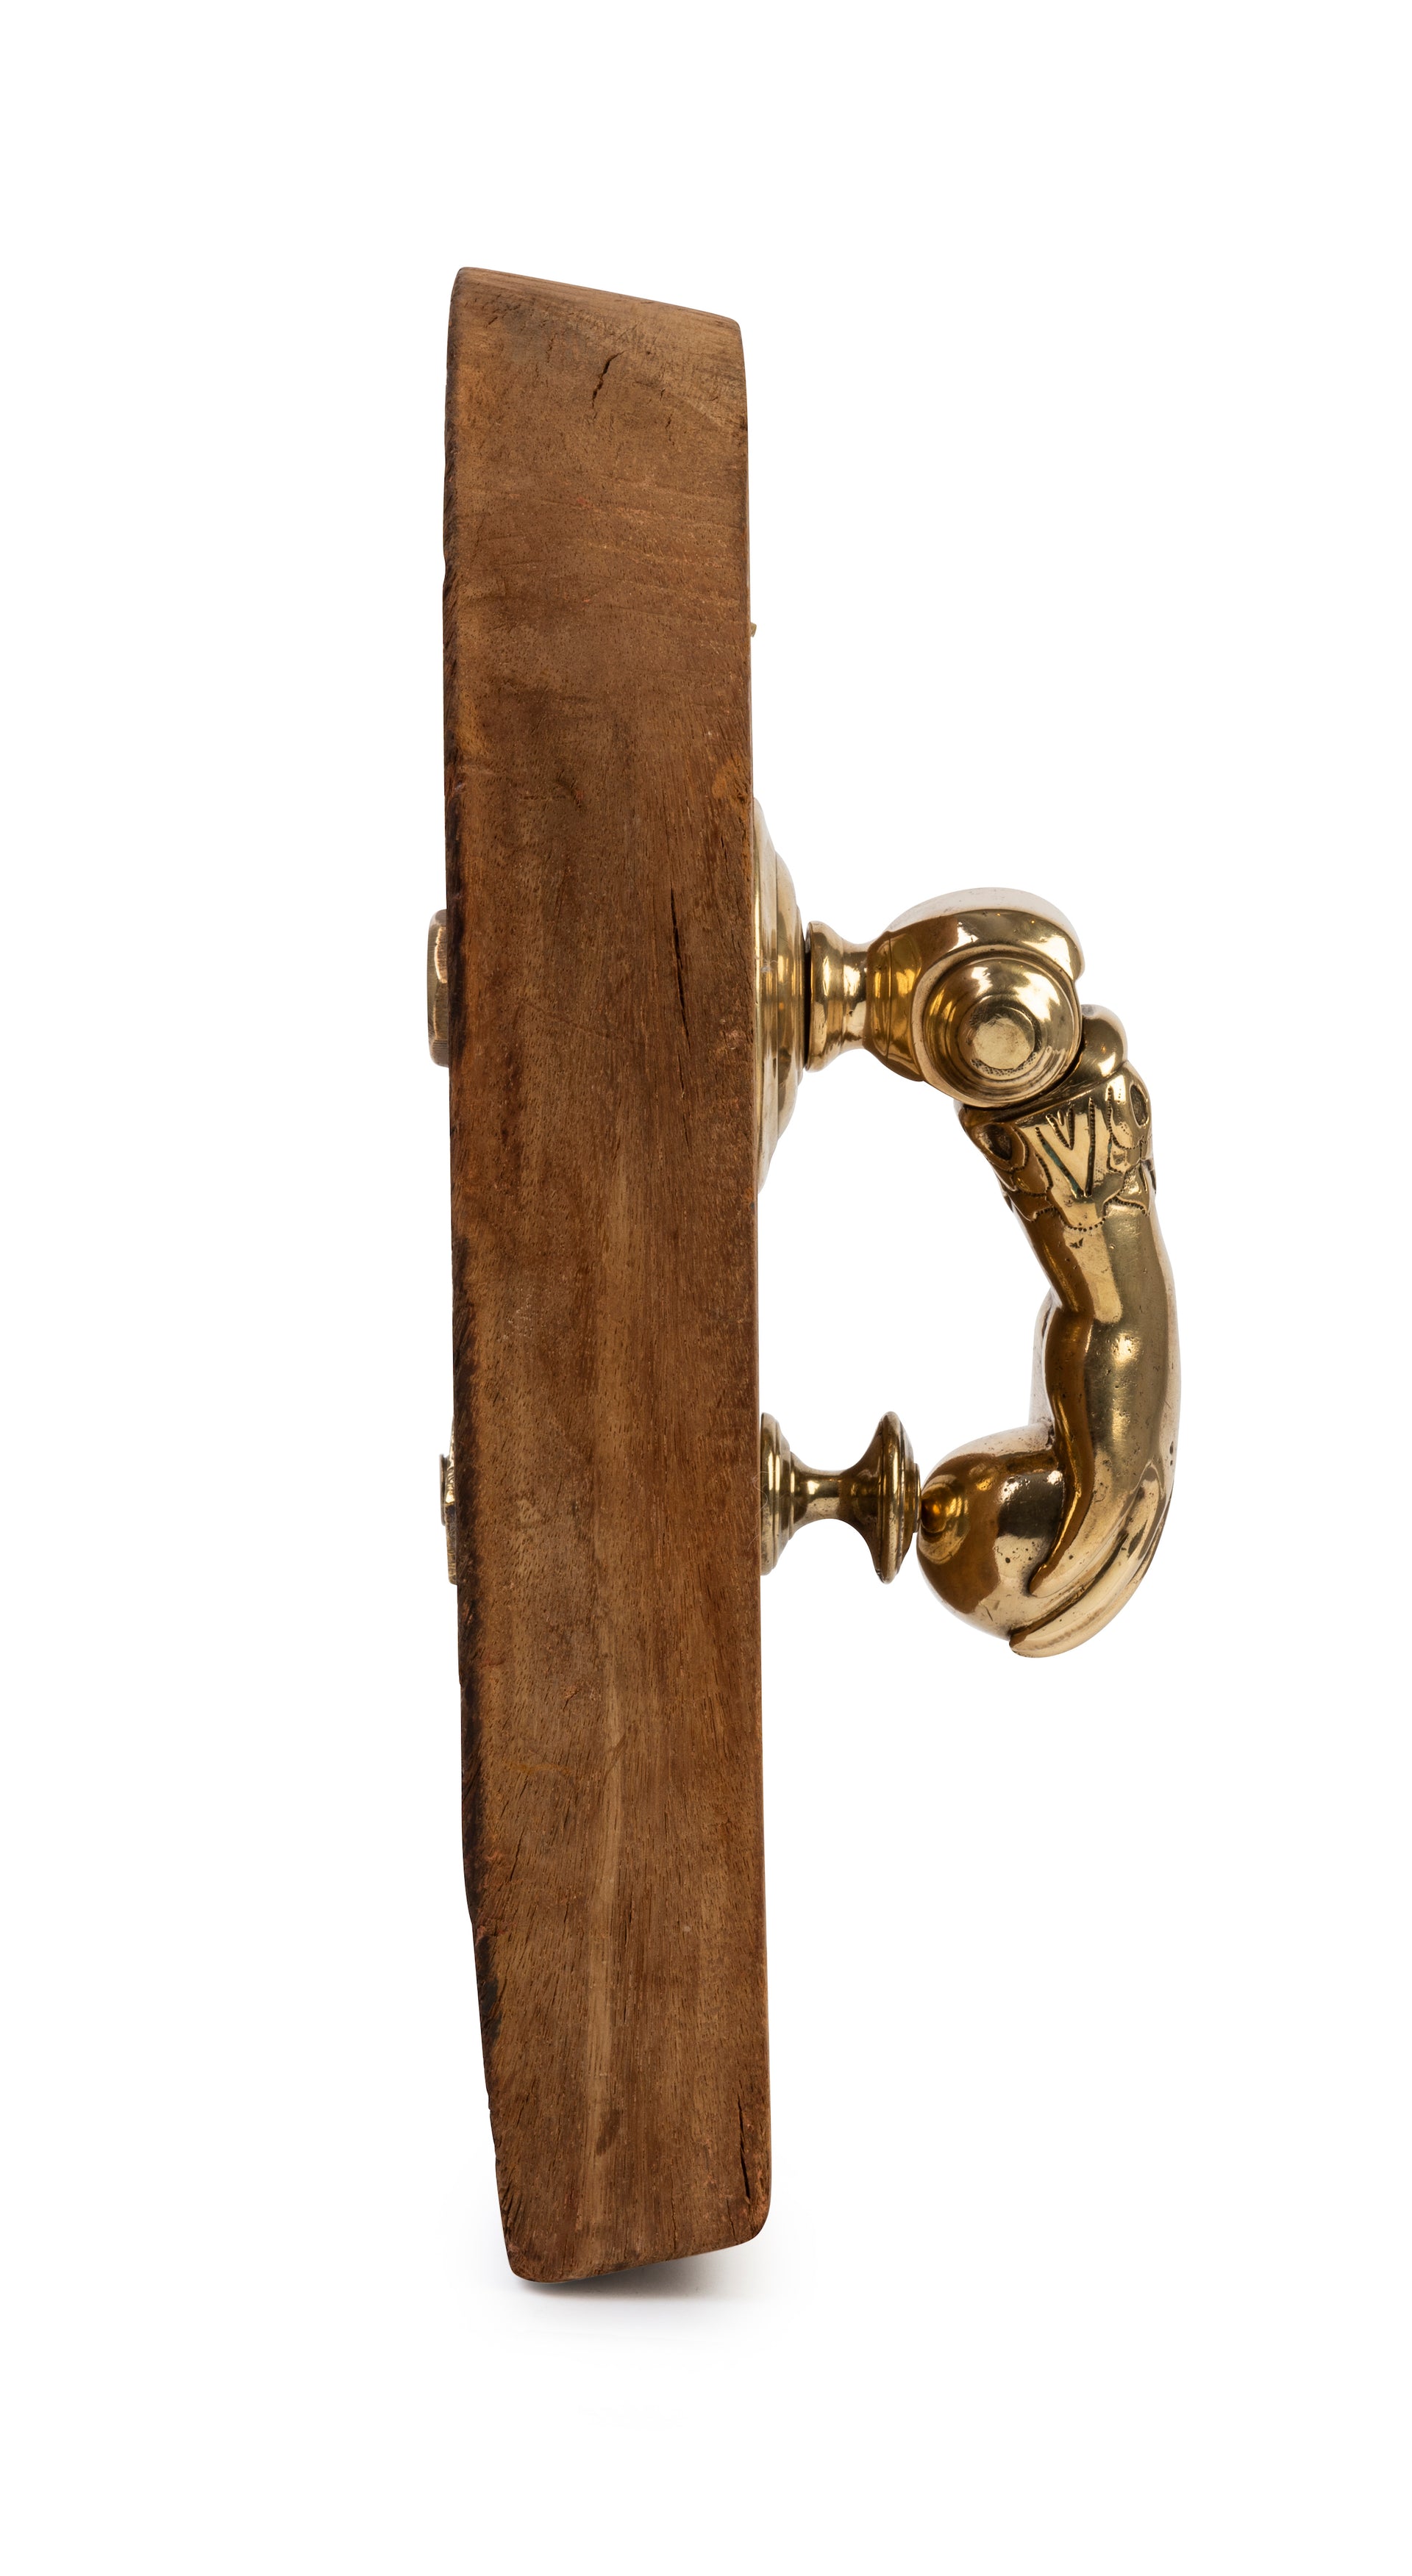 SOLD An impressive polished brass door knocker in the form of a hand, French 19th Century